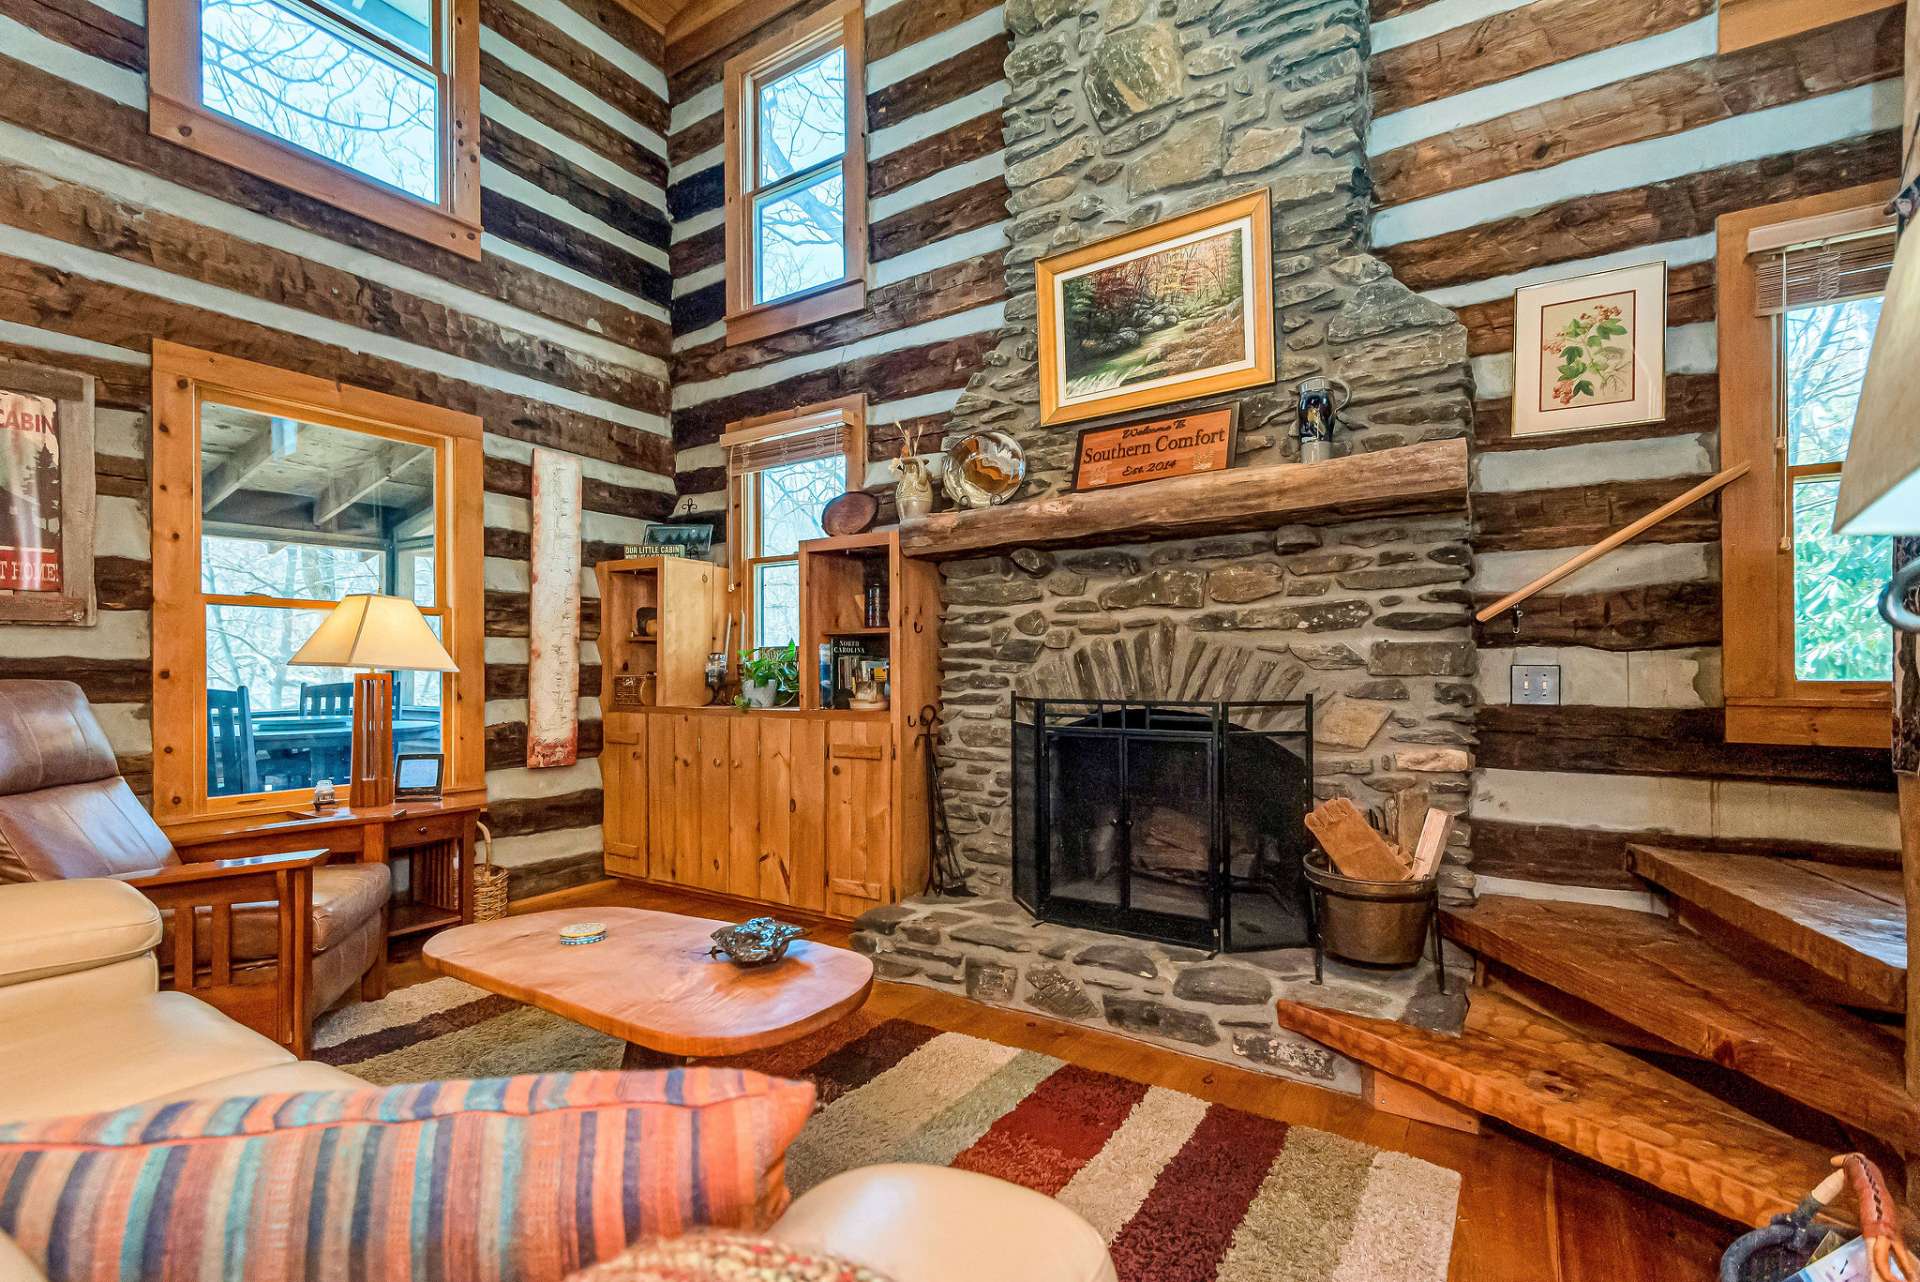 Enjoy the ambiance of the living room with it's vaulted wood ceilings and majestic floor-to-ceiling native stone fireplace.